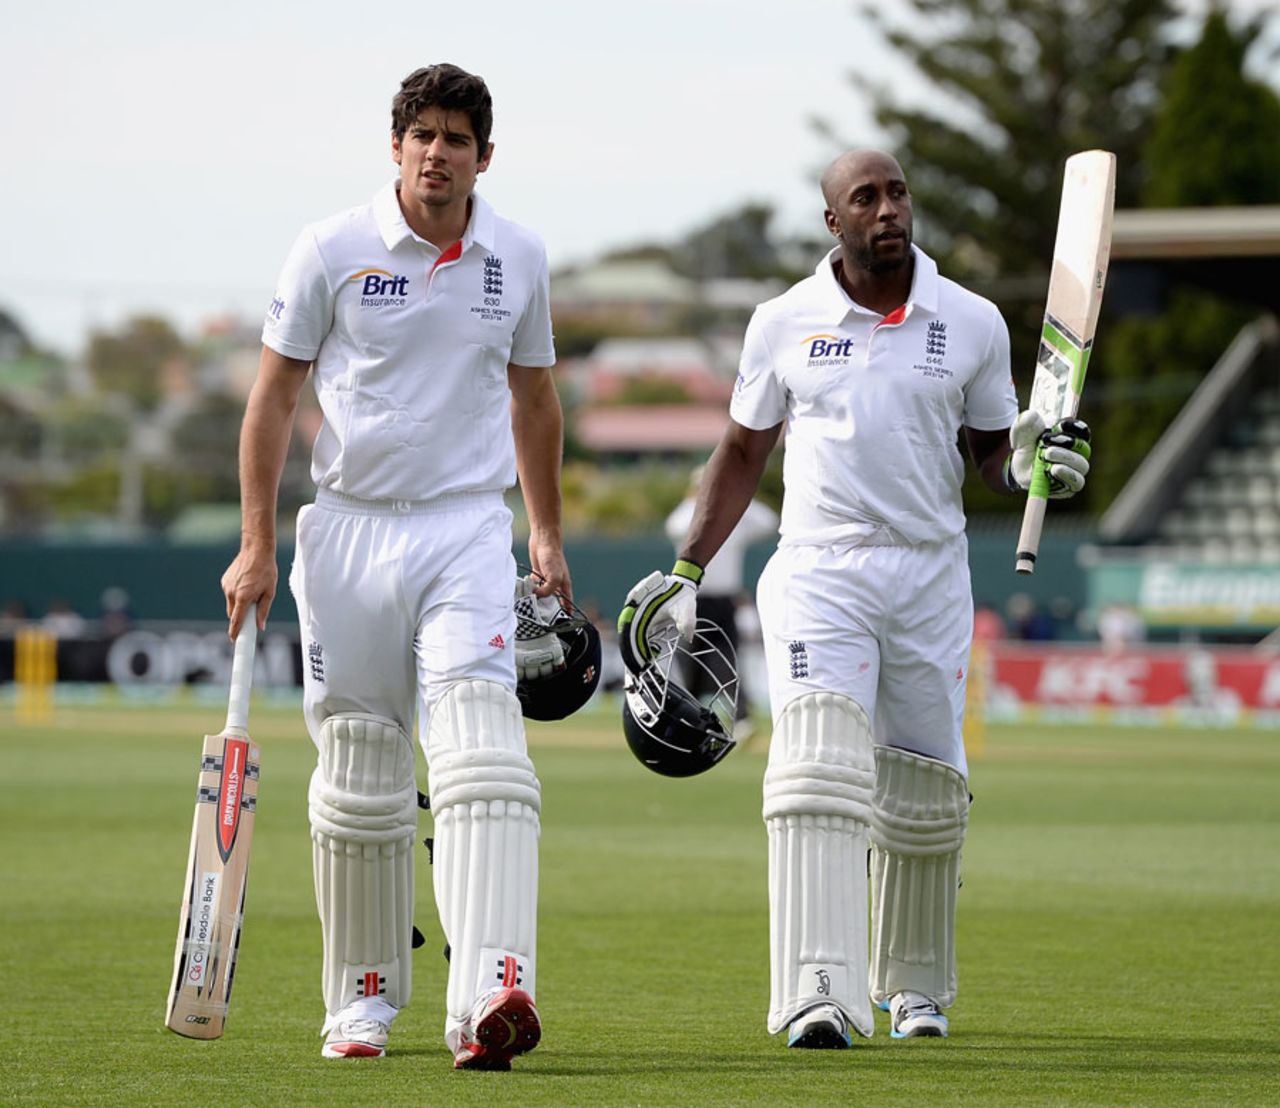 Alastair Cook and Michael Carberry left the field unbeaten at the end of the day, Australia A v England, Hobart, 1st day, November 6, 2013